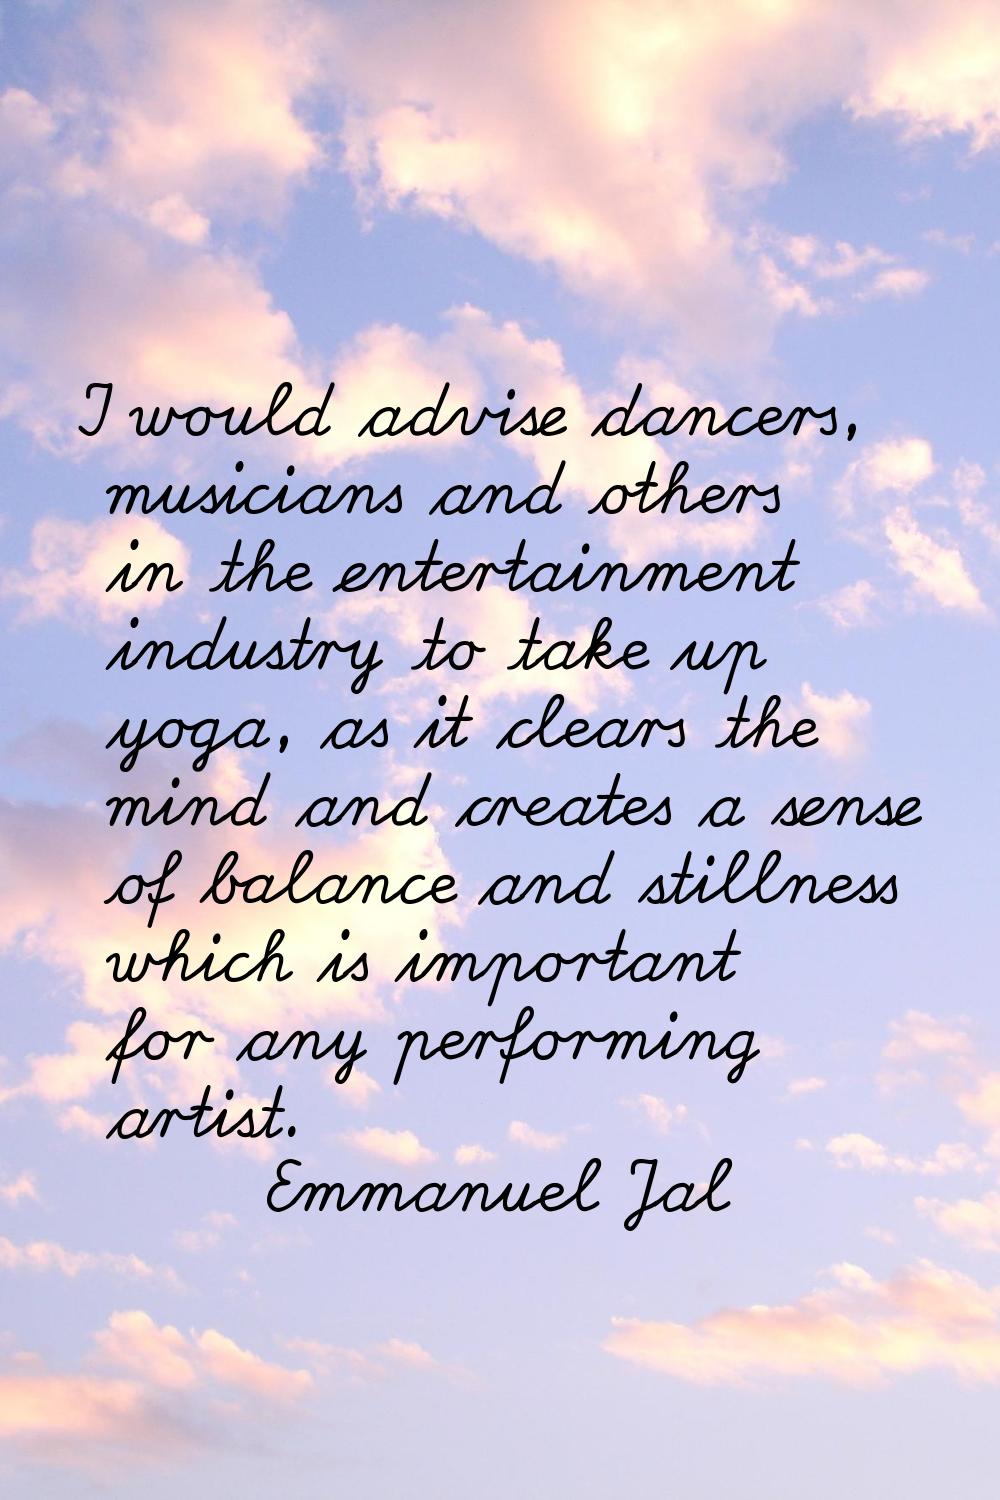 I would advise dancers, musicians and others in the entertainment industry to take up yoga, as it c